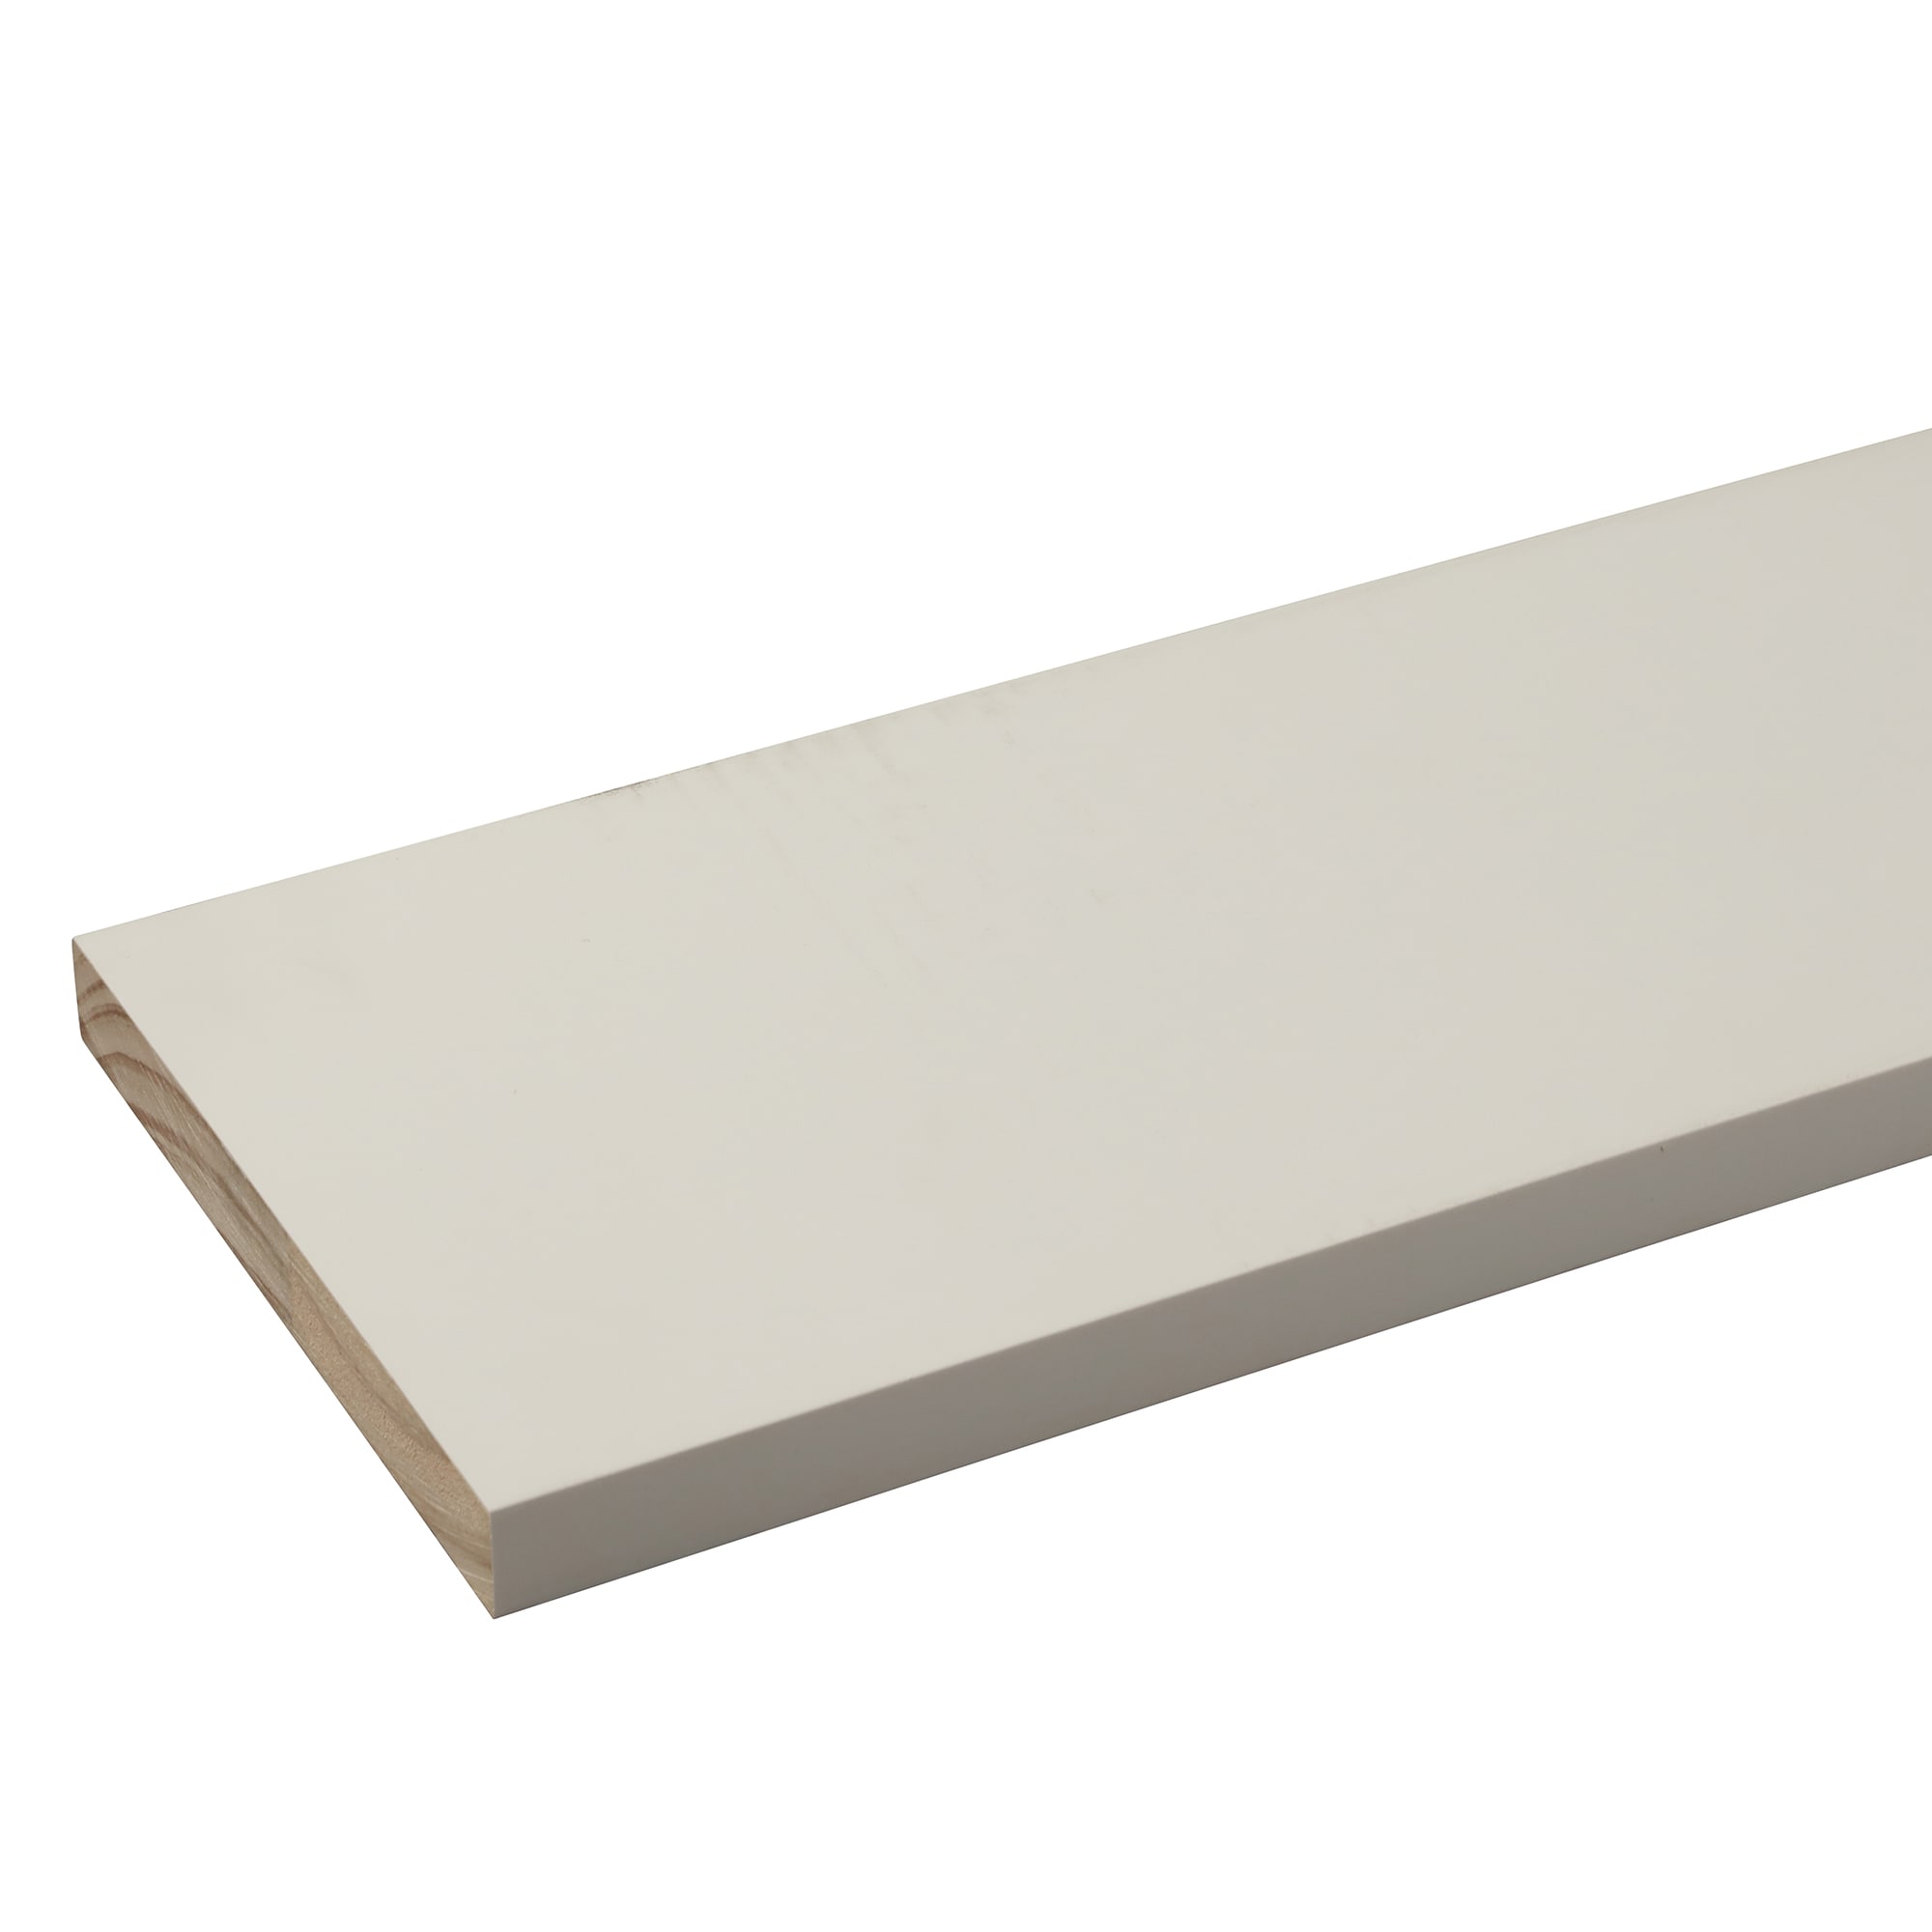 RELIABILT 1-in x 8-in x 8-ft Painted MDF Board in the Appearance